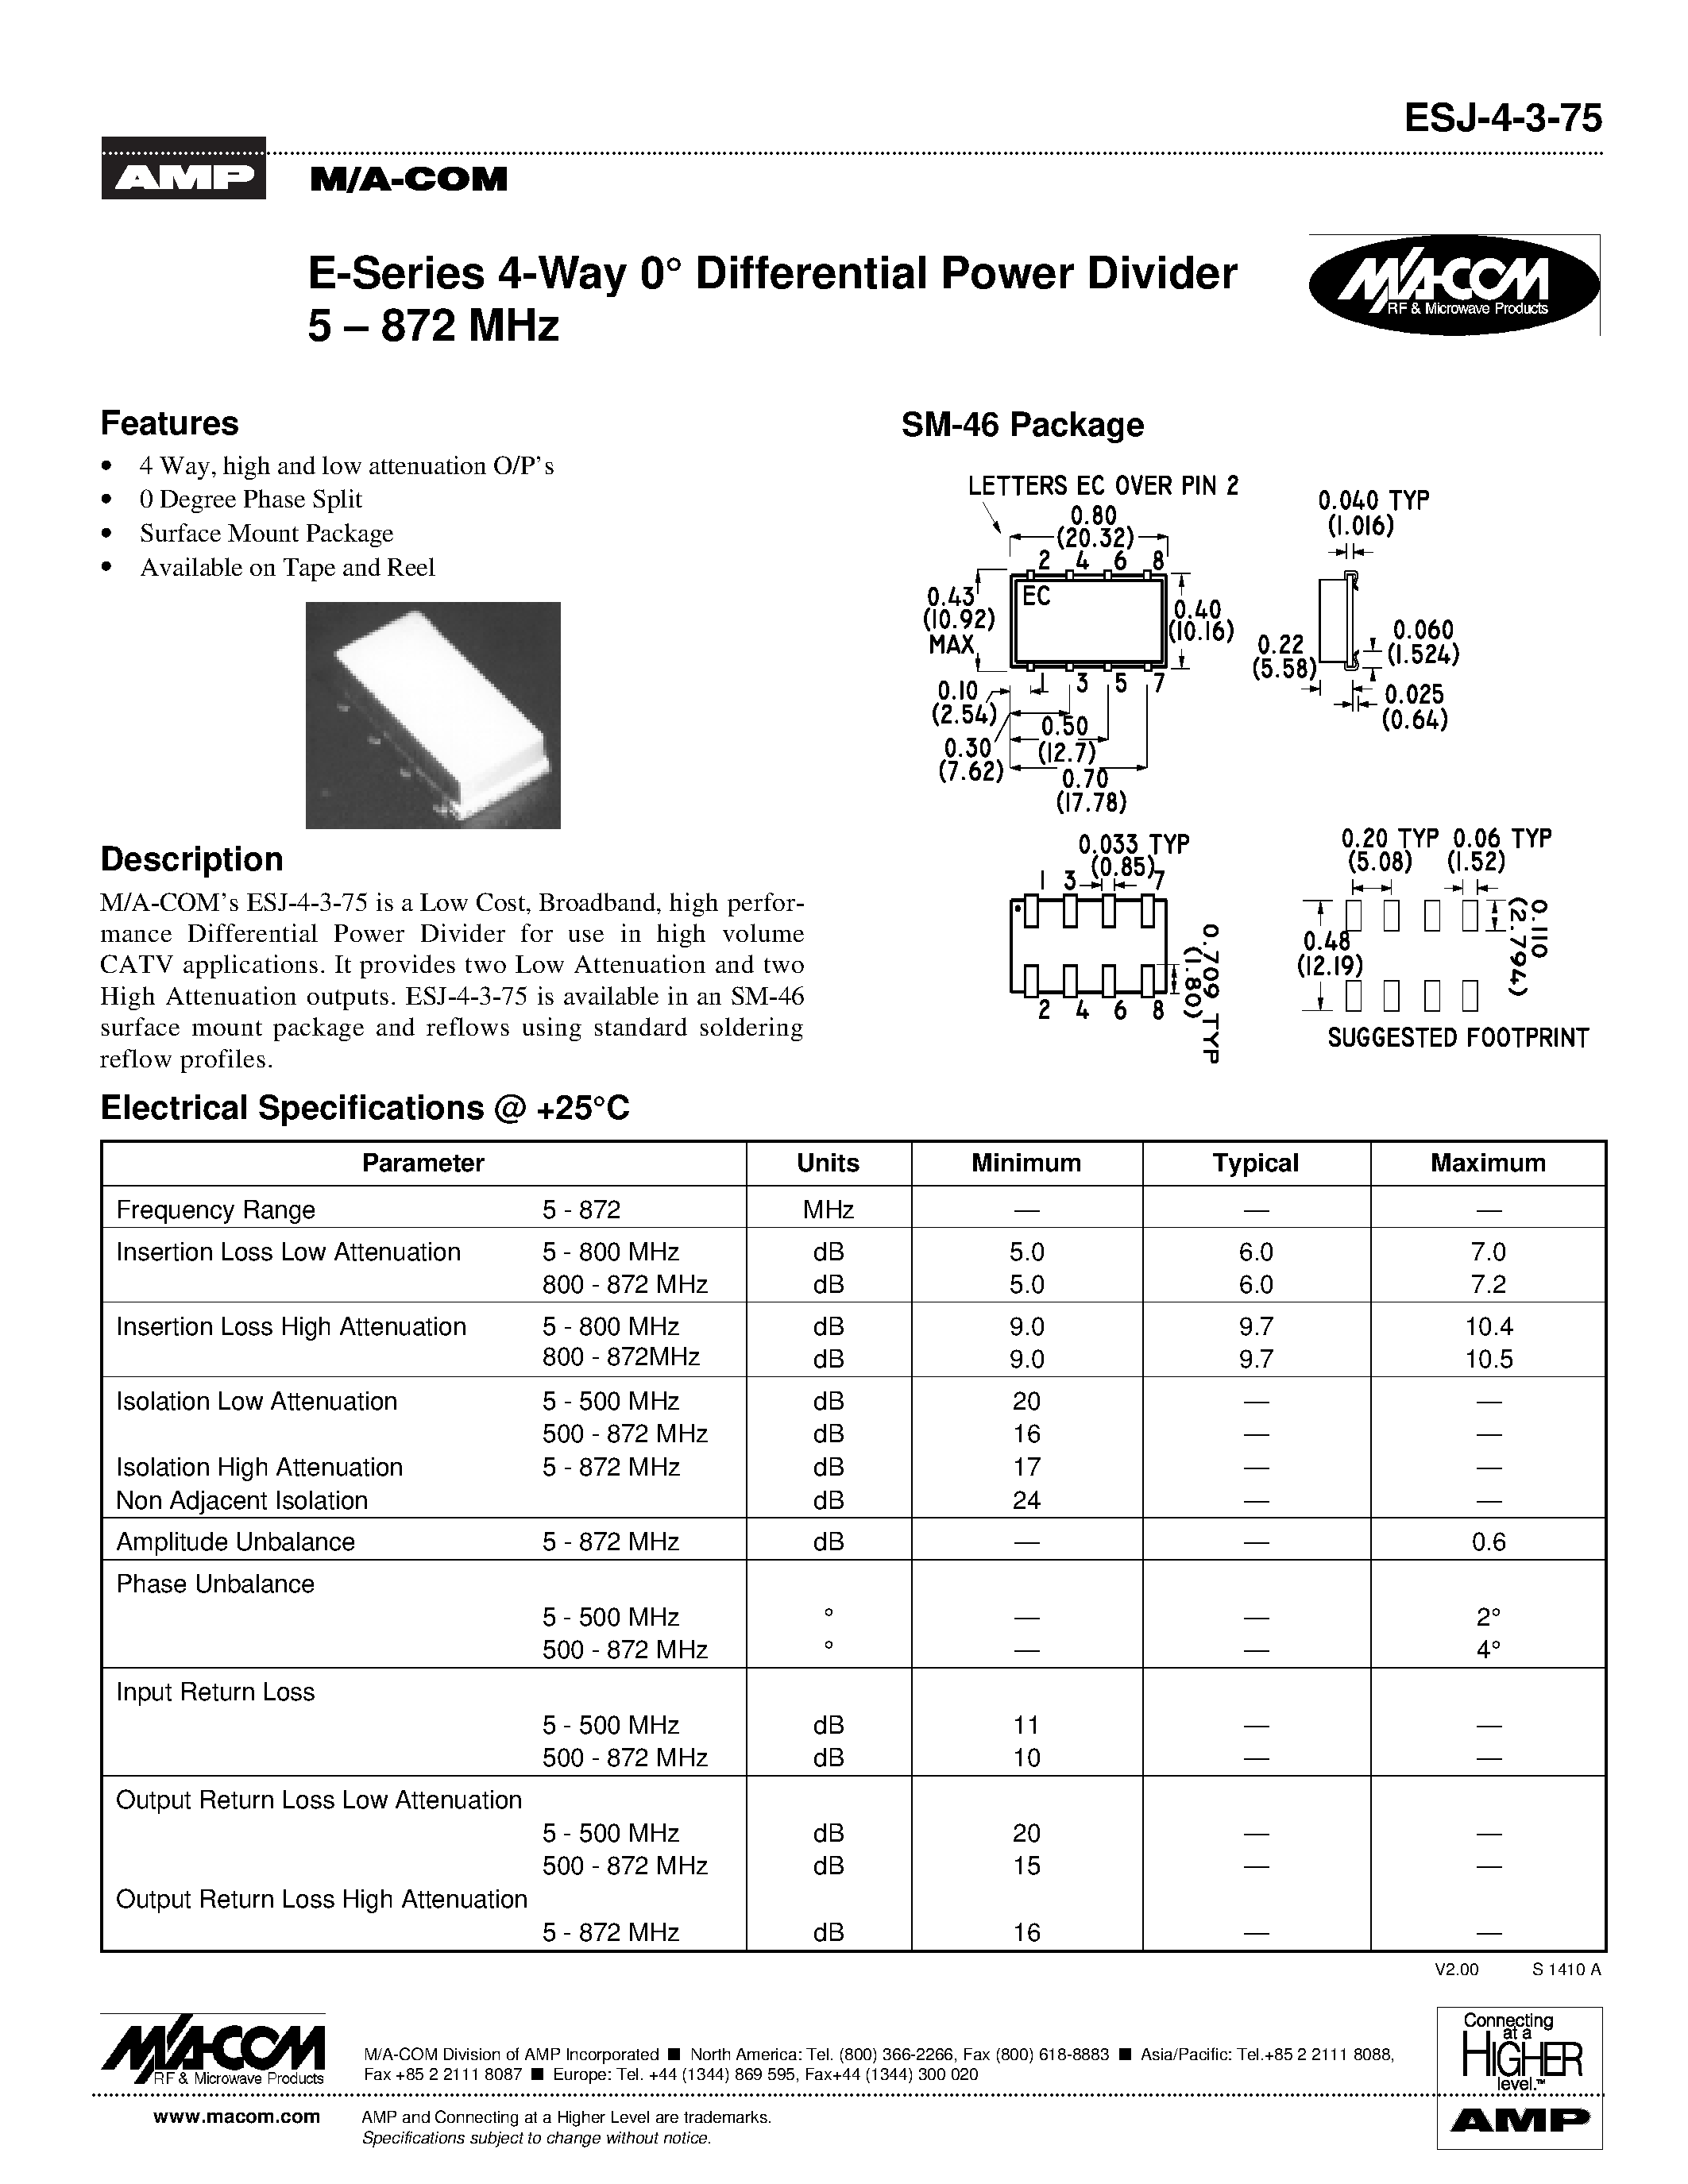 Datasheet ESJ-4-3-75 - E-Series 4-Way 0 Differential Power Divider 5 - 872 MHz page 1